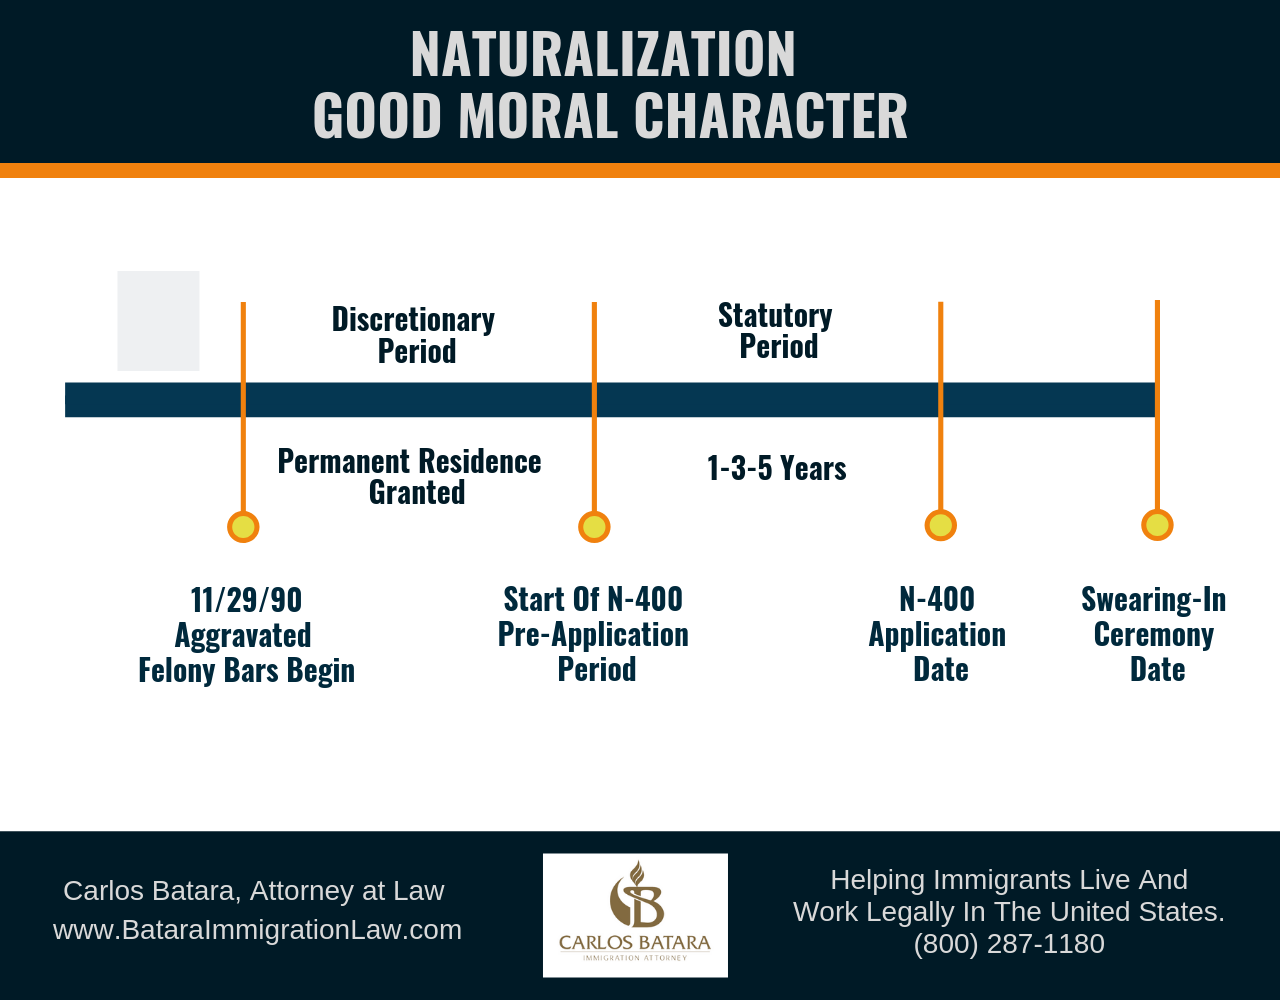 How Good Moral Character Affects Naturalization